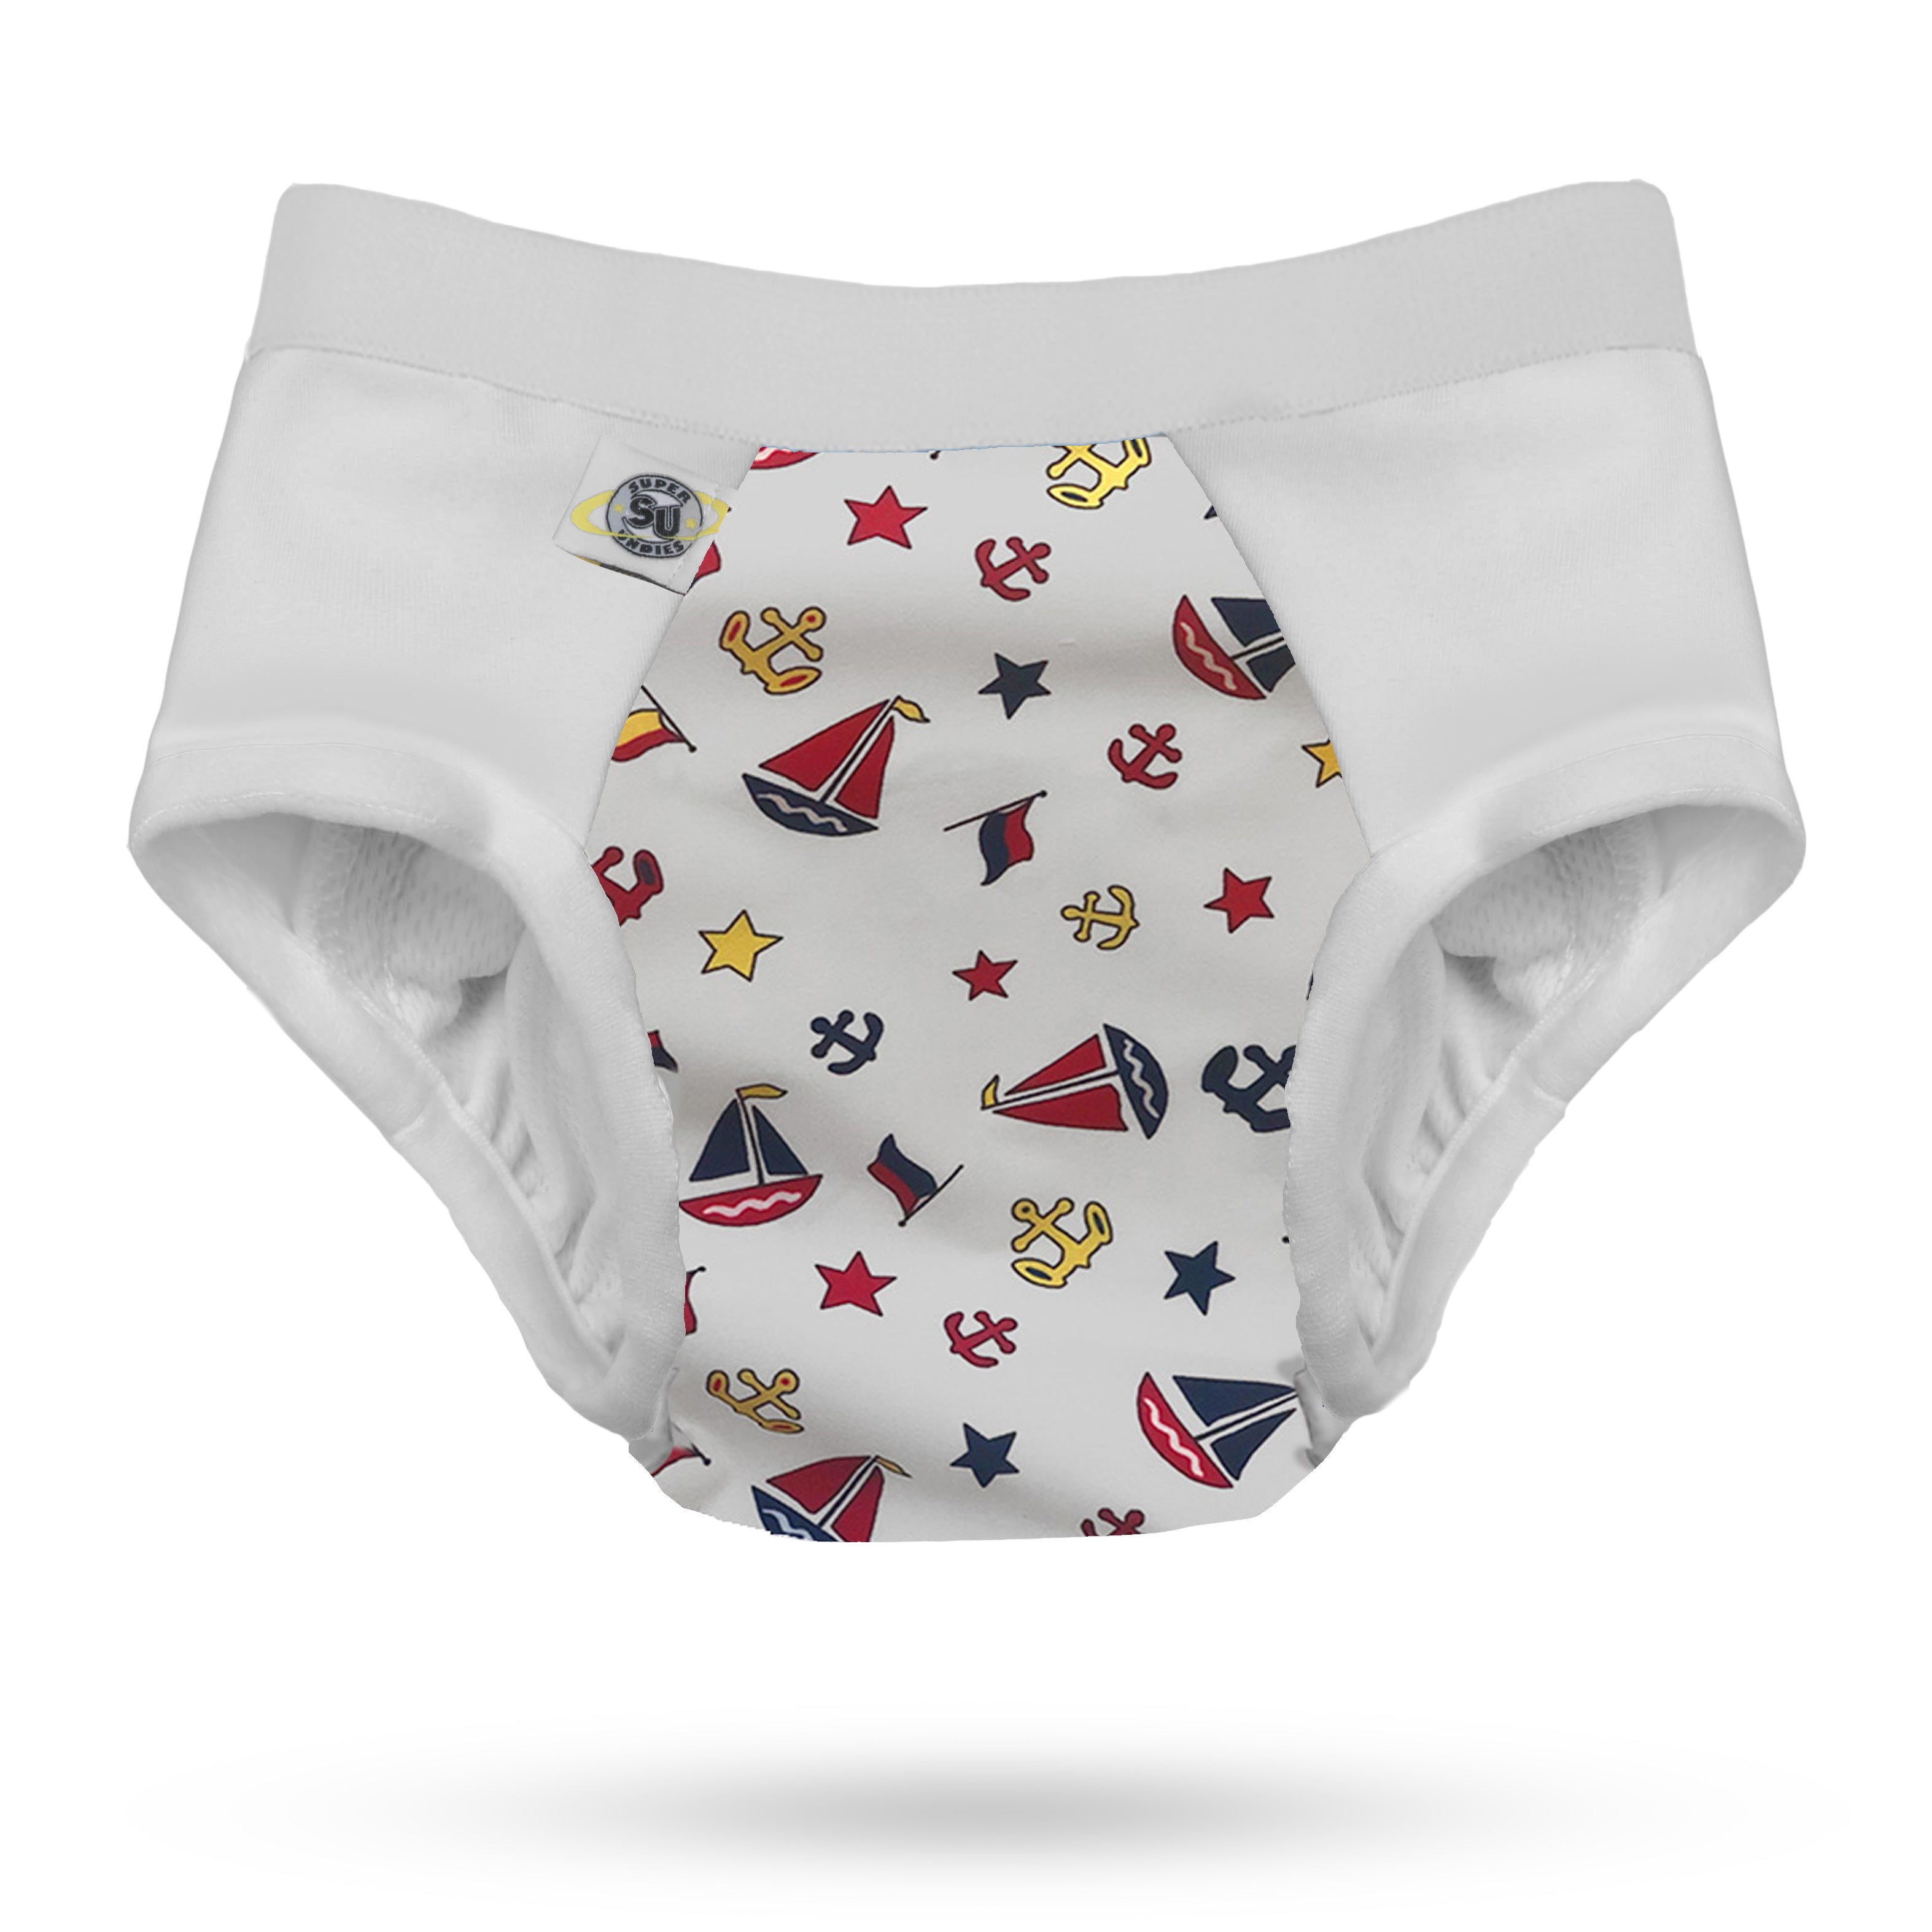 Waterproof Absorbent Incontinence Underwear for Kiddos with